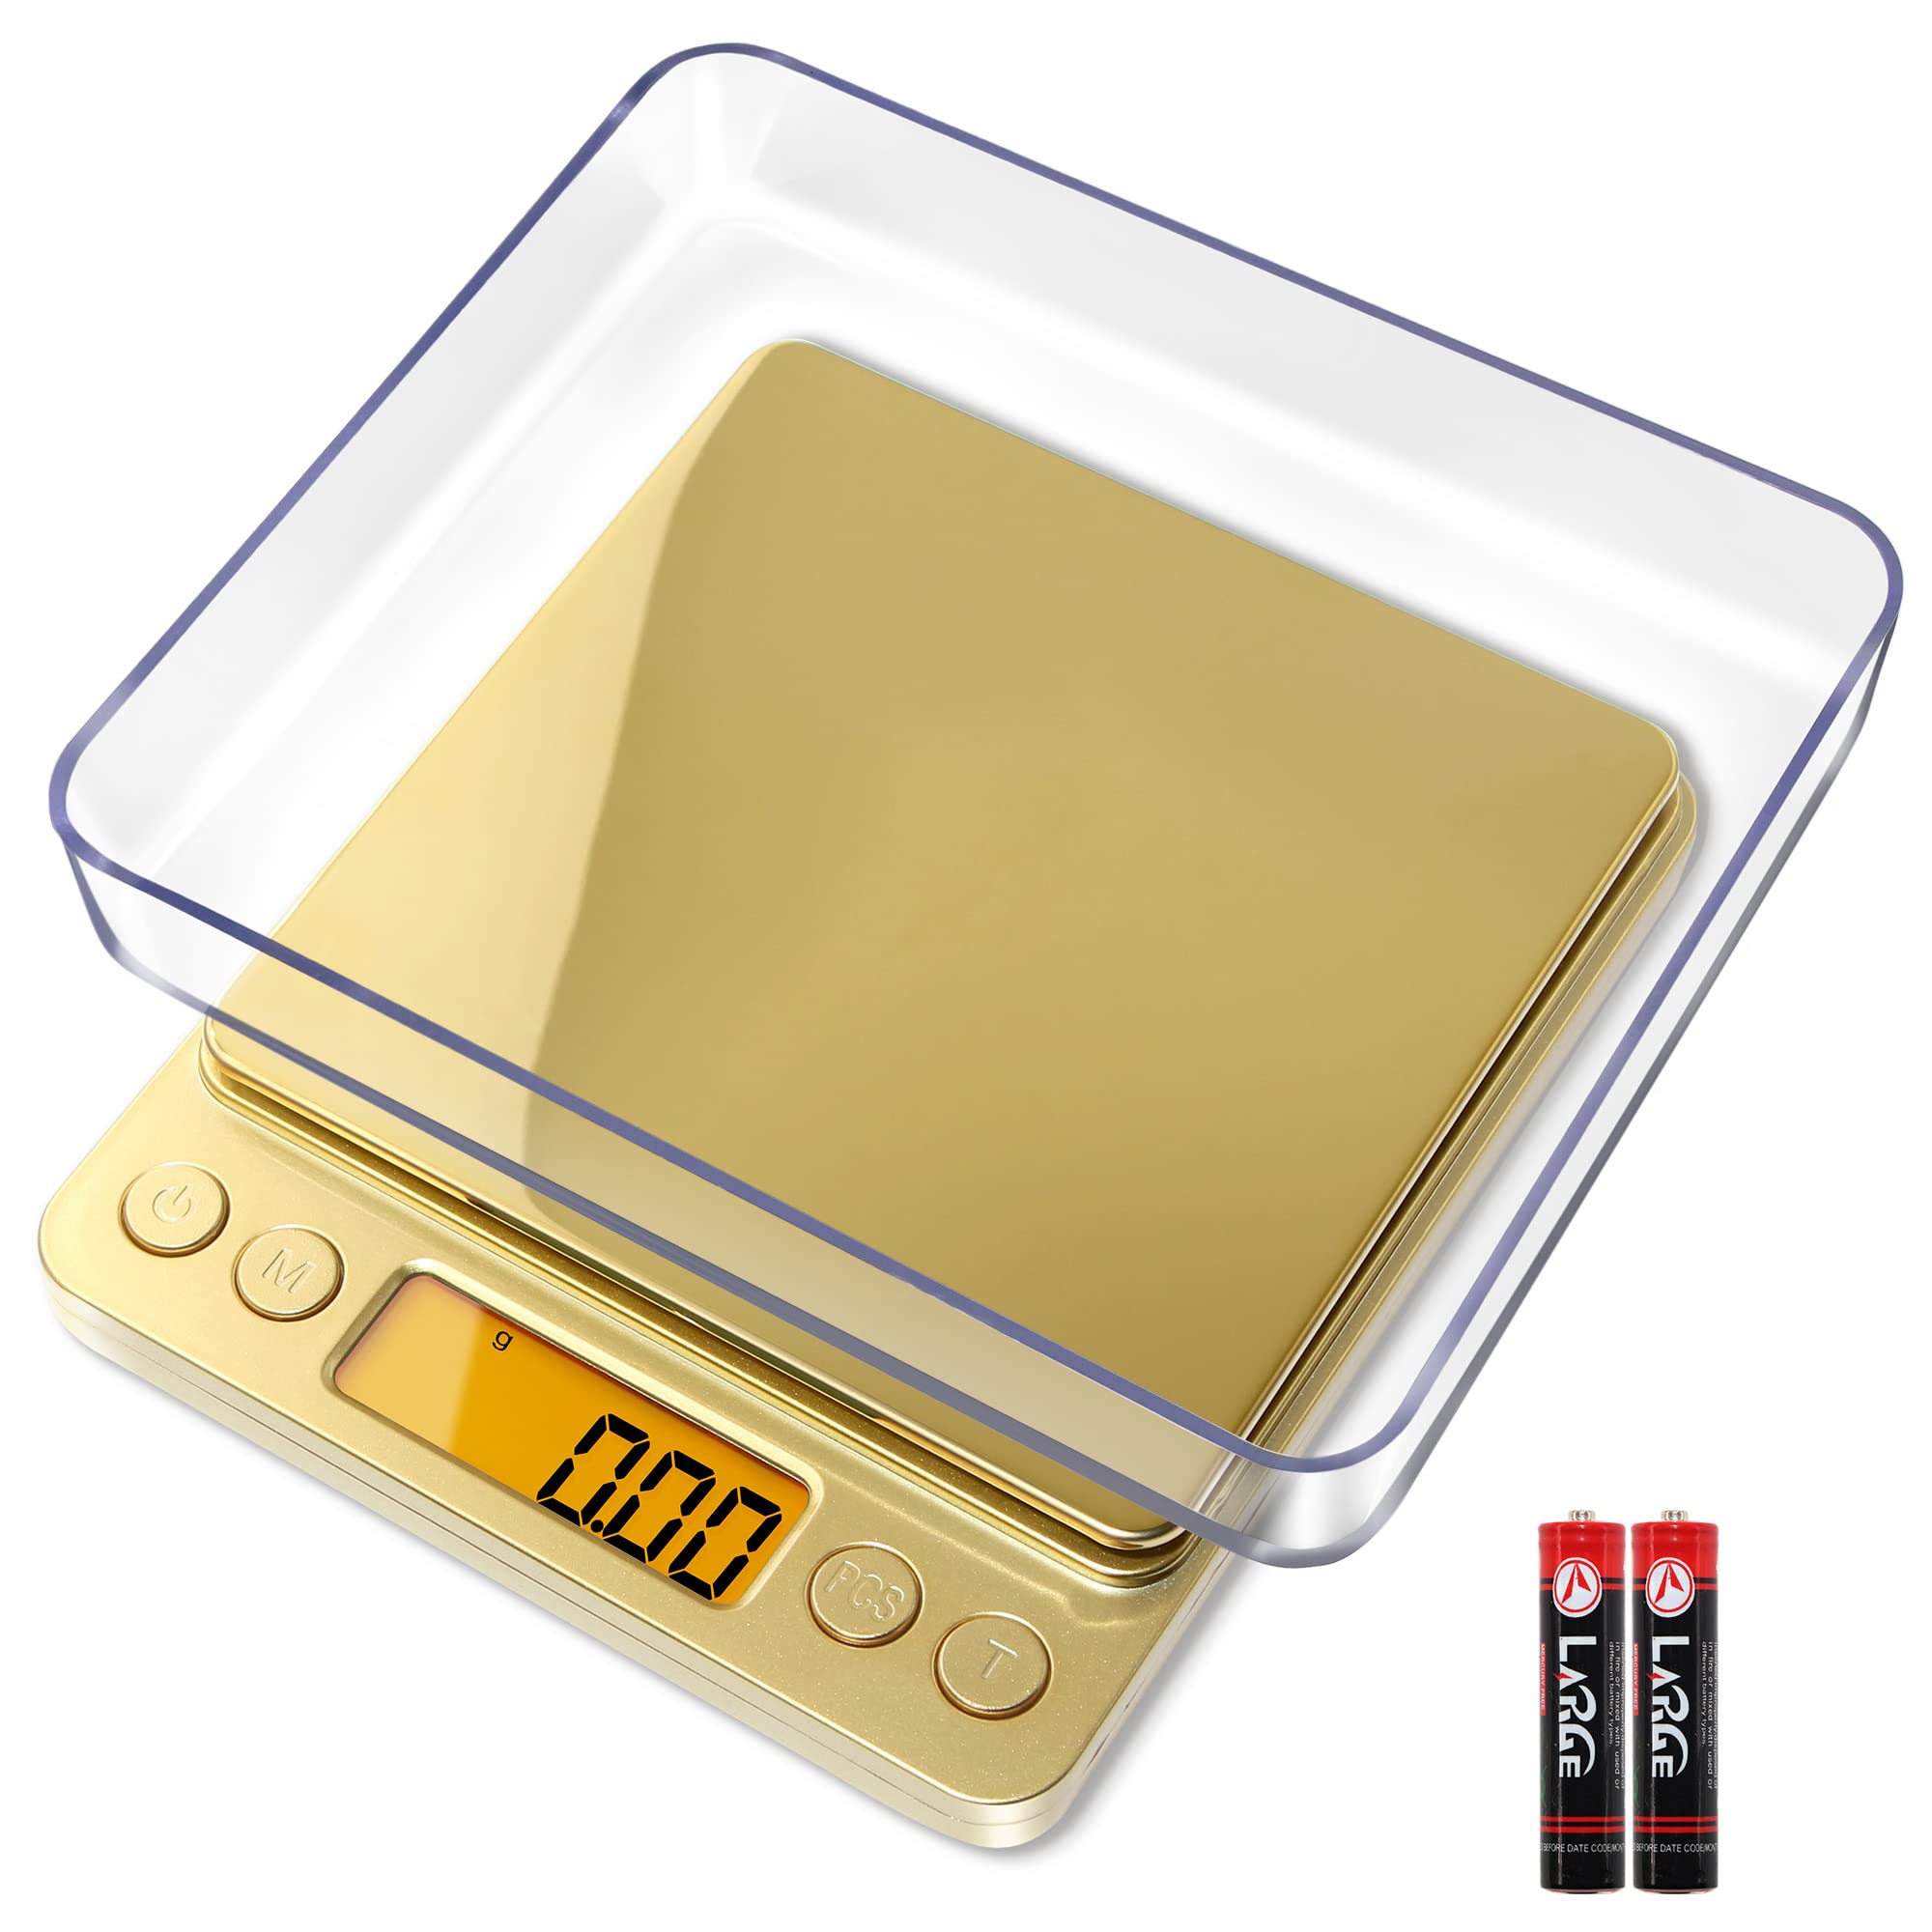 A scale measuring gold.